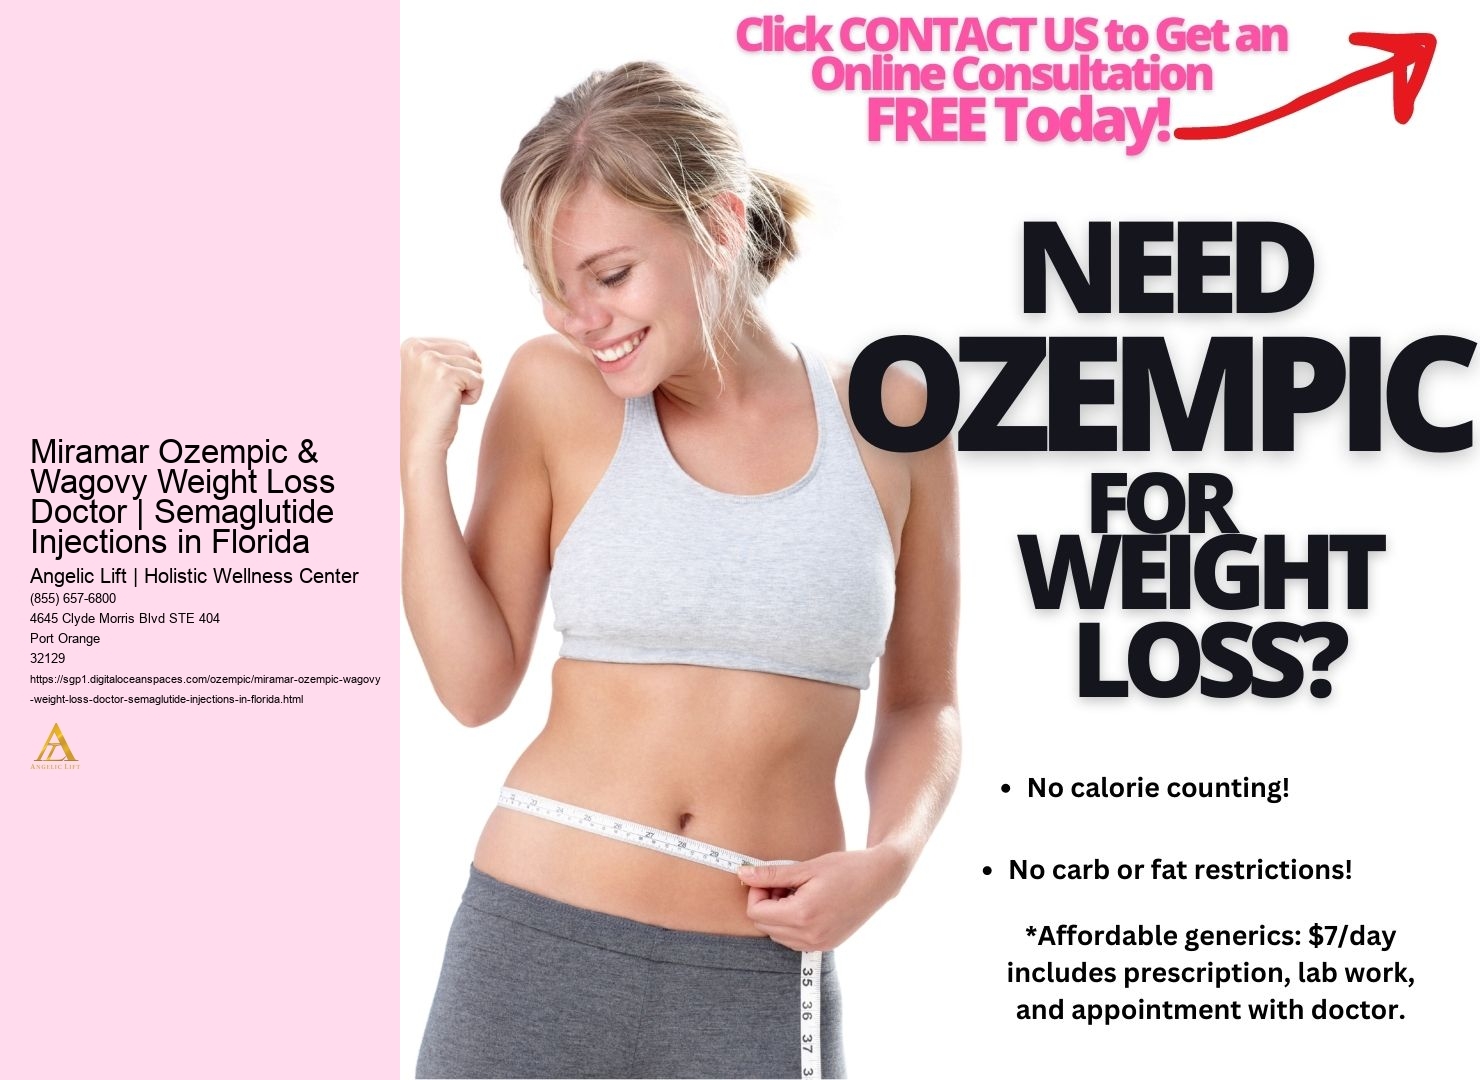 Miramar Ozempic & Wagovy Weight Loss Doctor | Semaglutide Injections in Florida